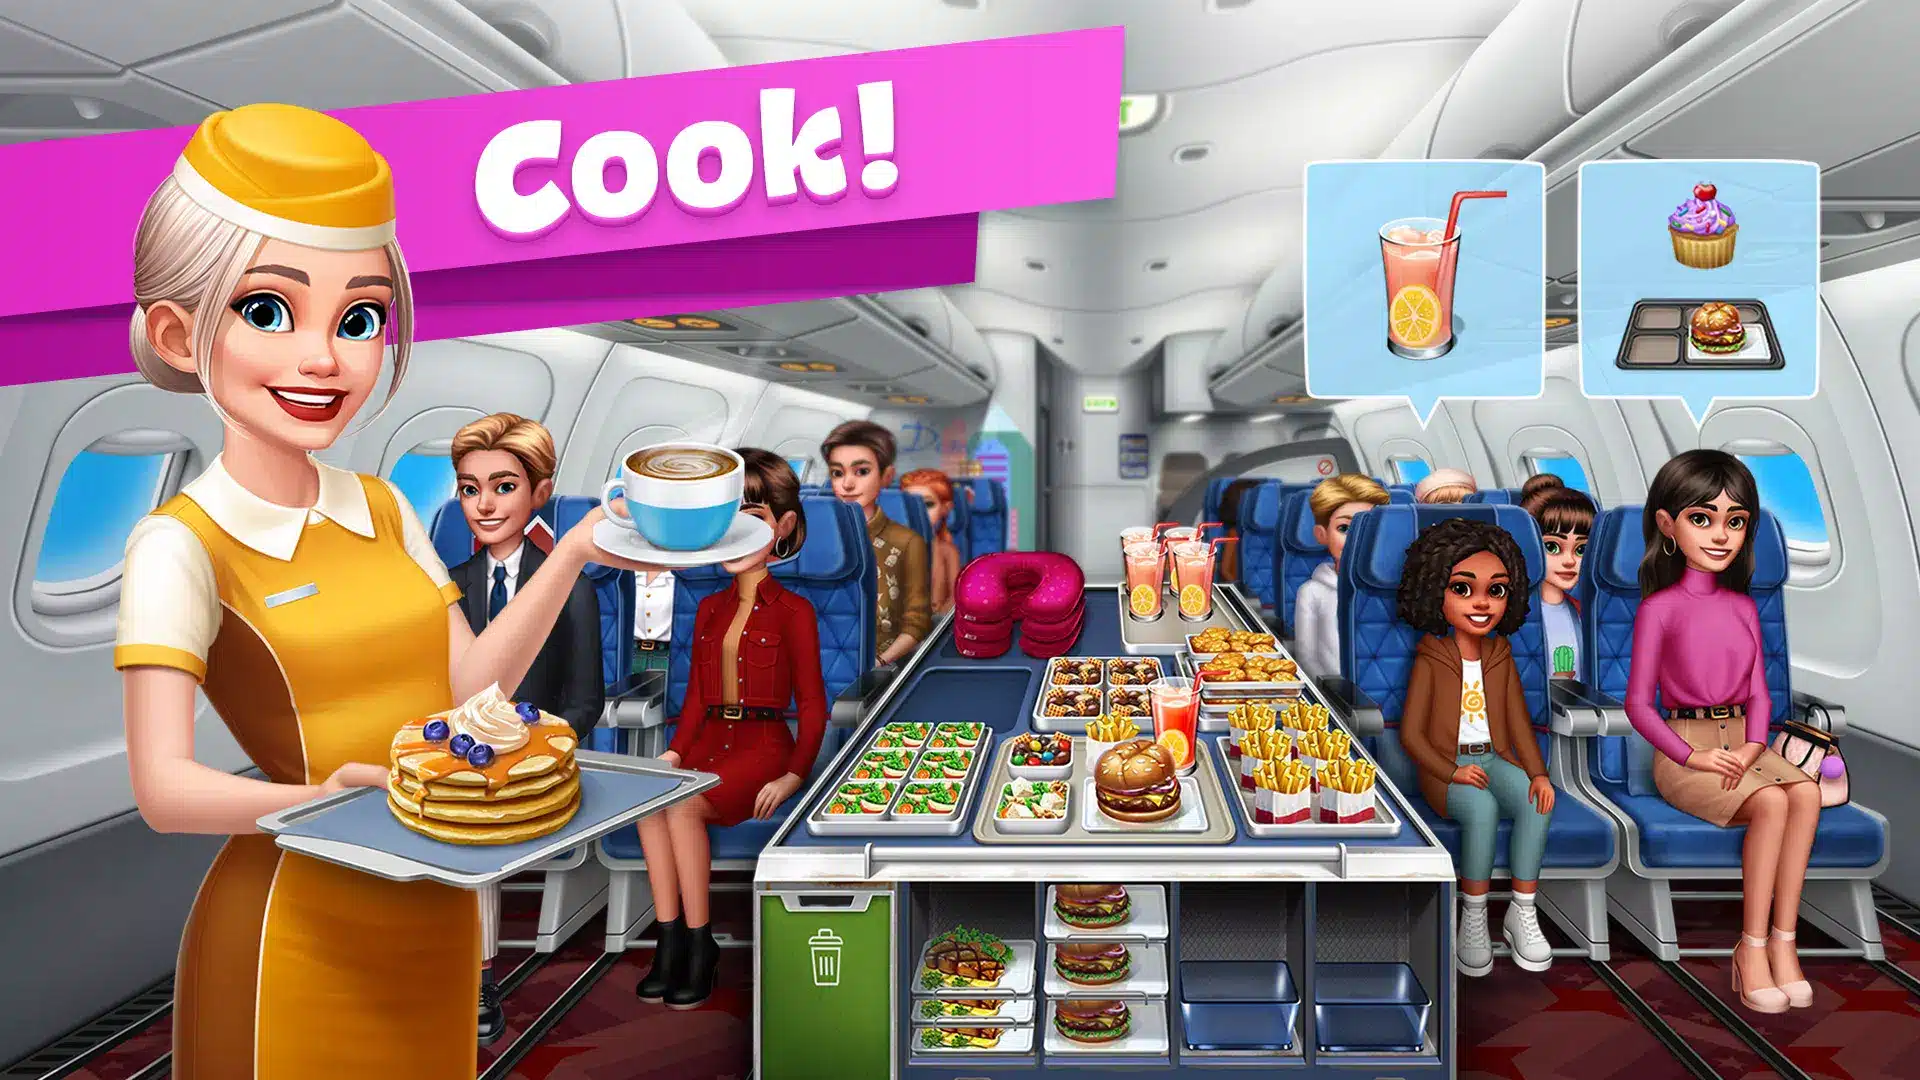 Airplane Chefs Image 1